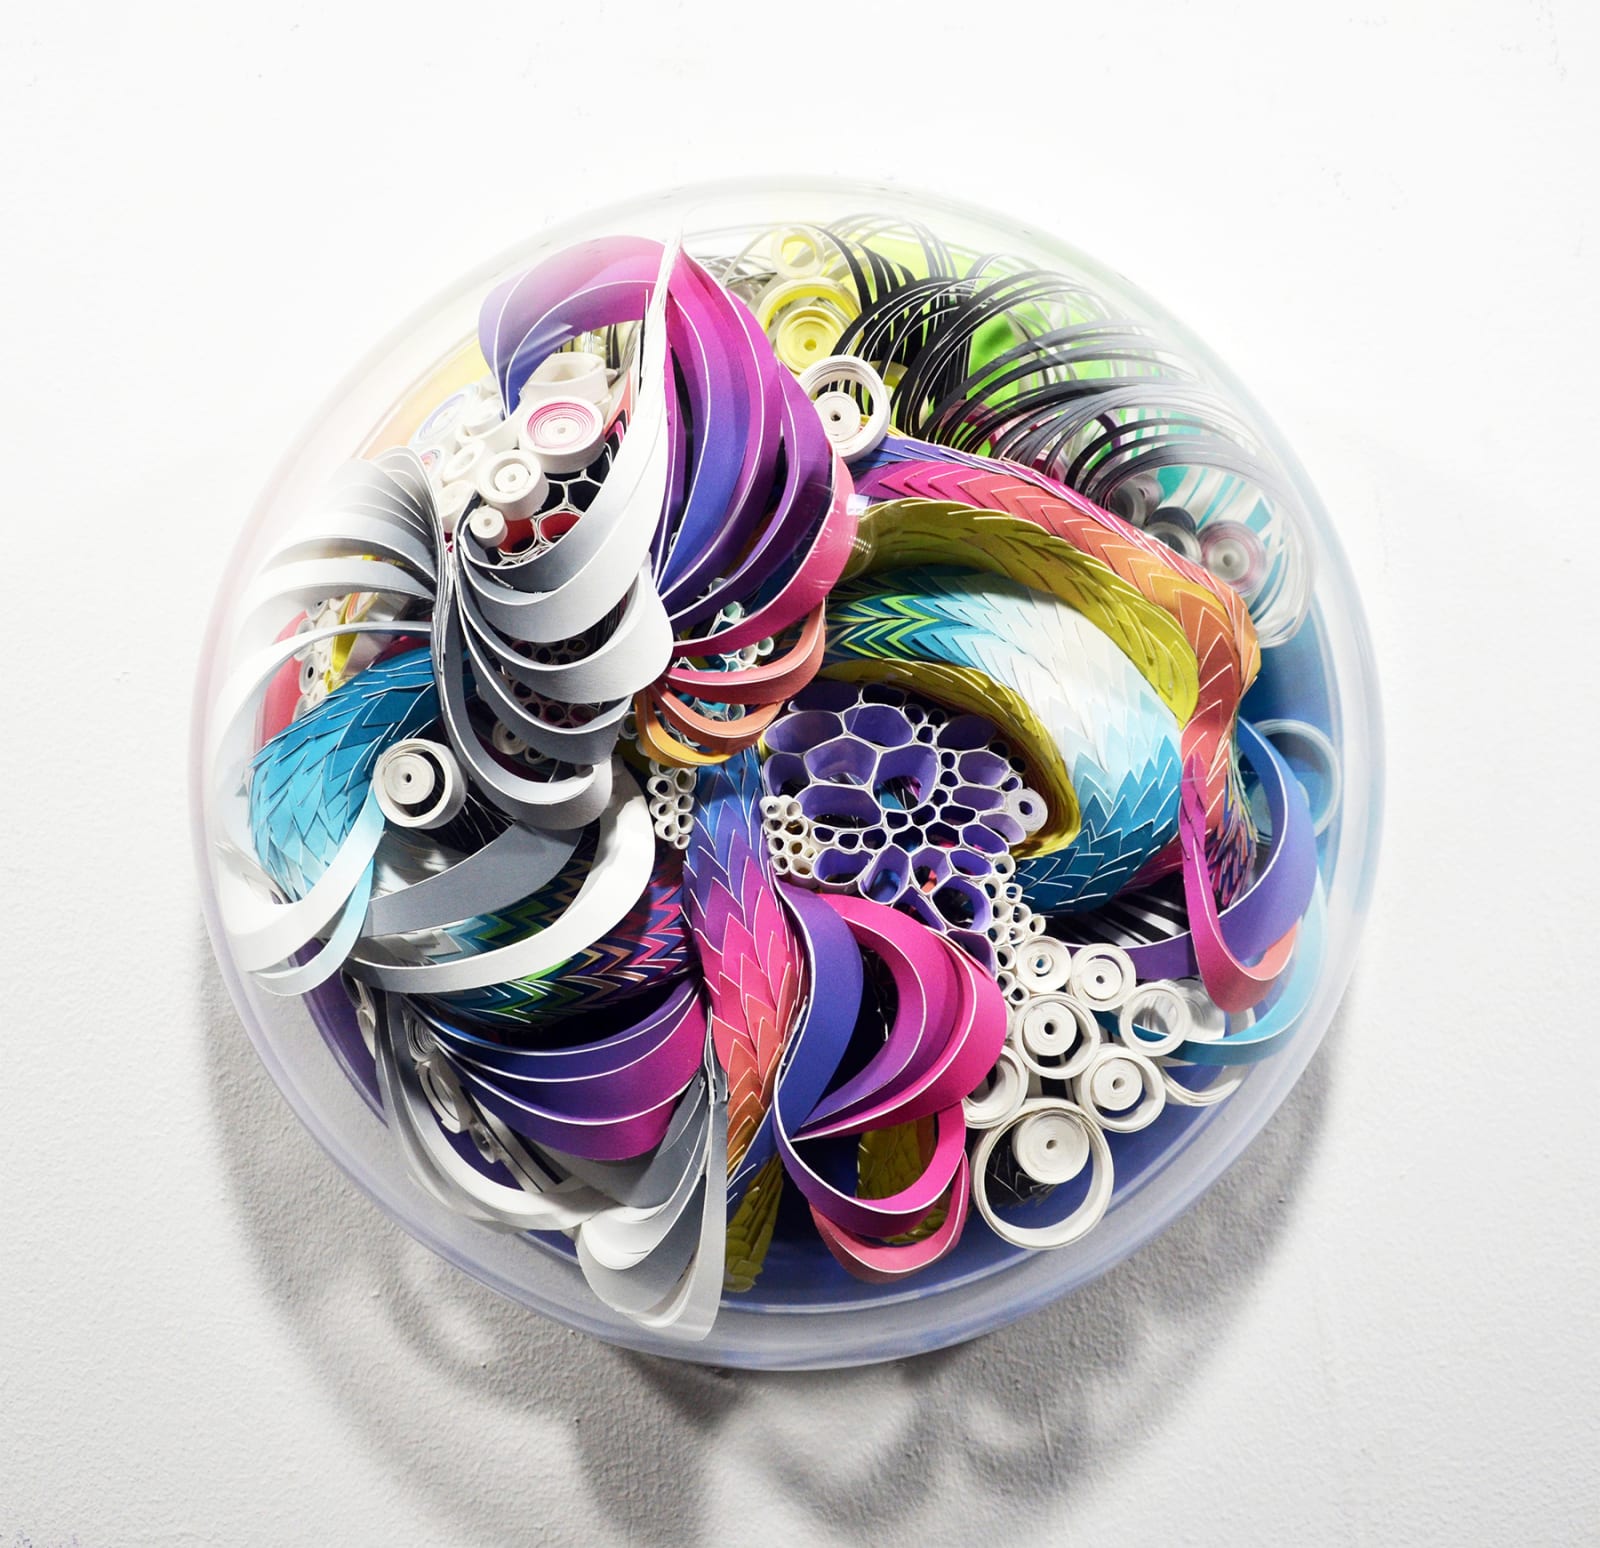 Crystal Wagner, Microbloom, 2021